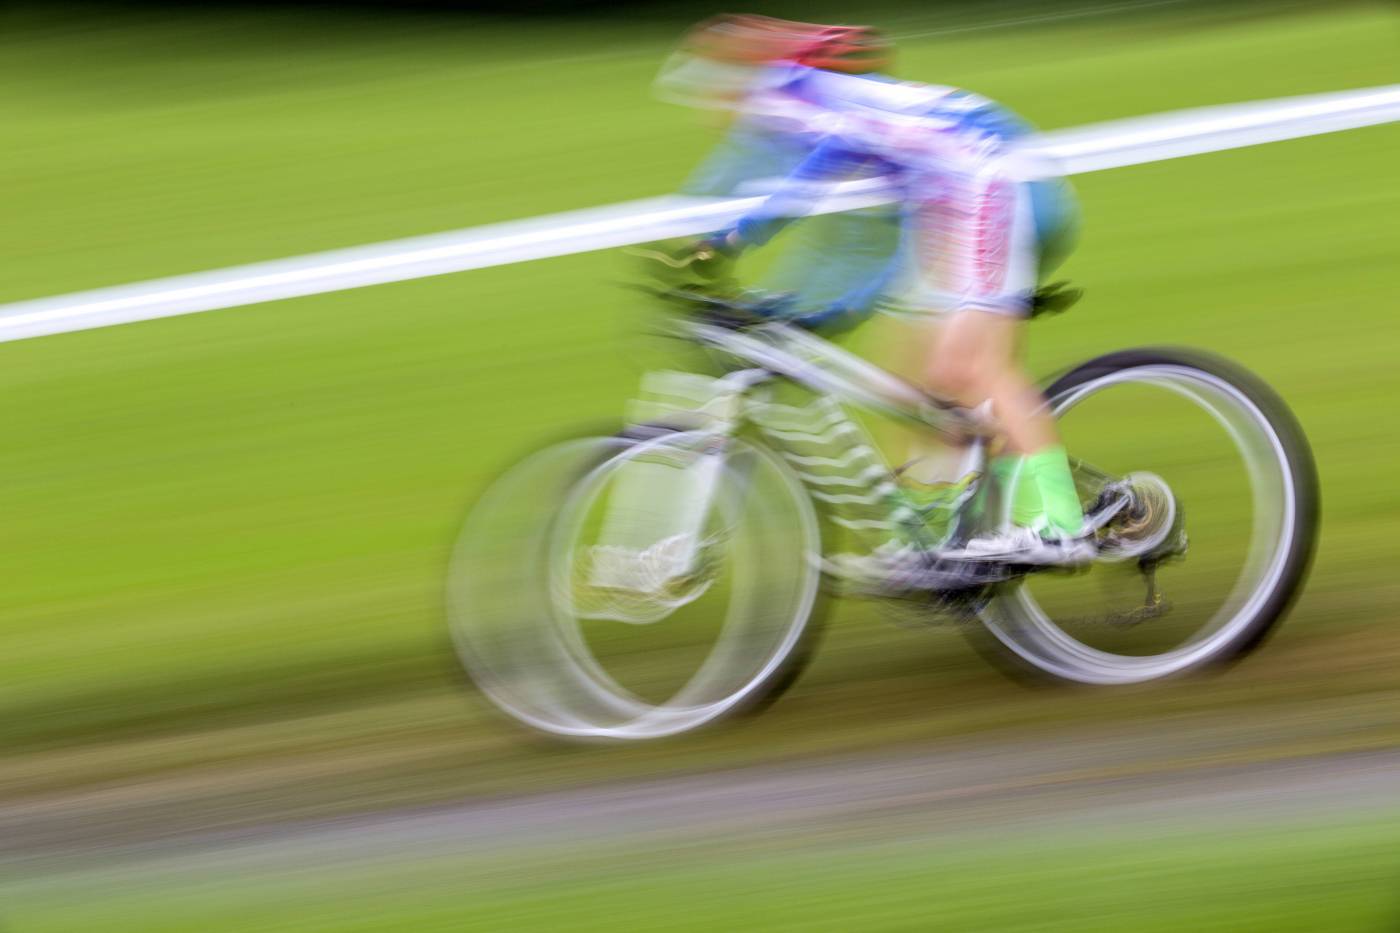 mountainbike racing speed/ picture